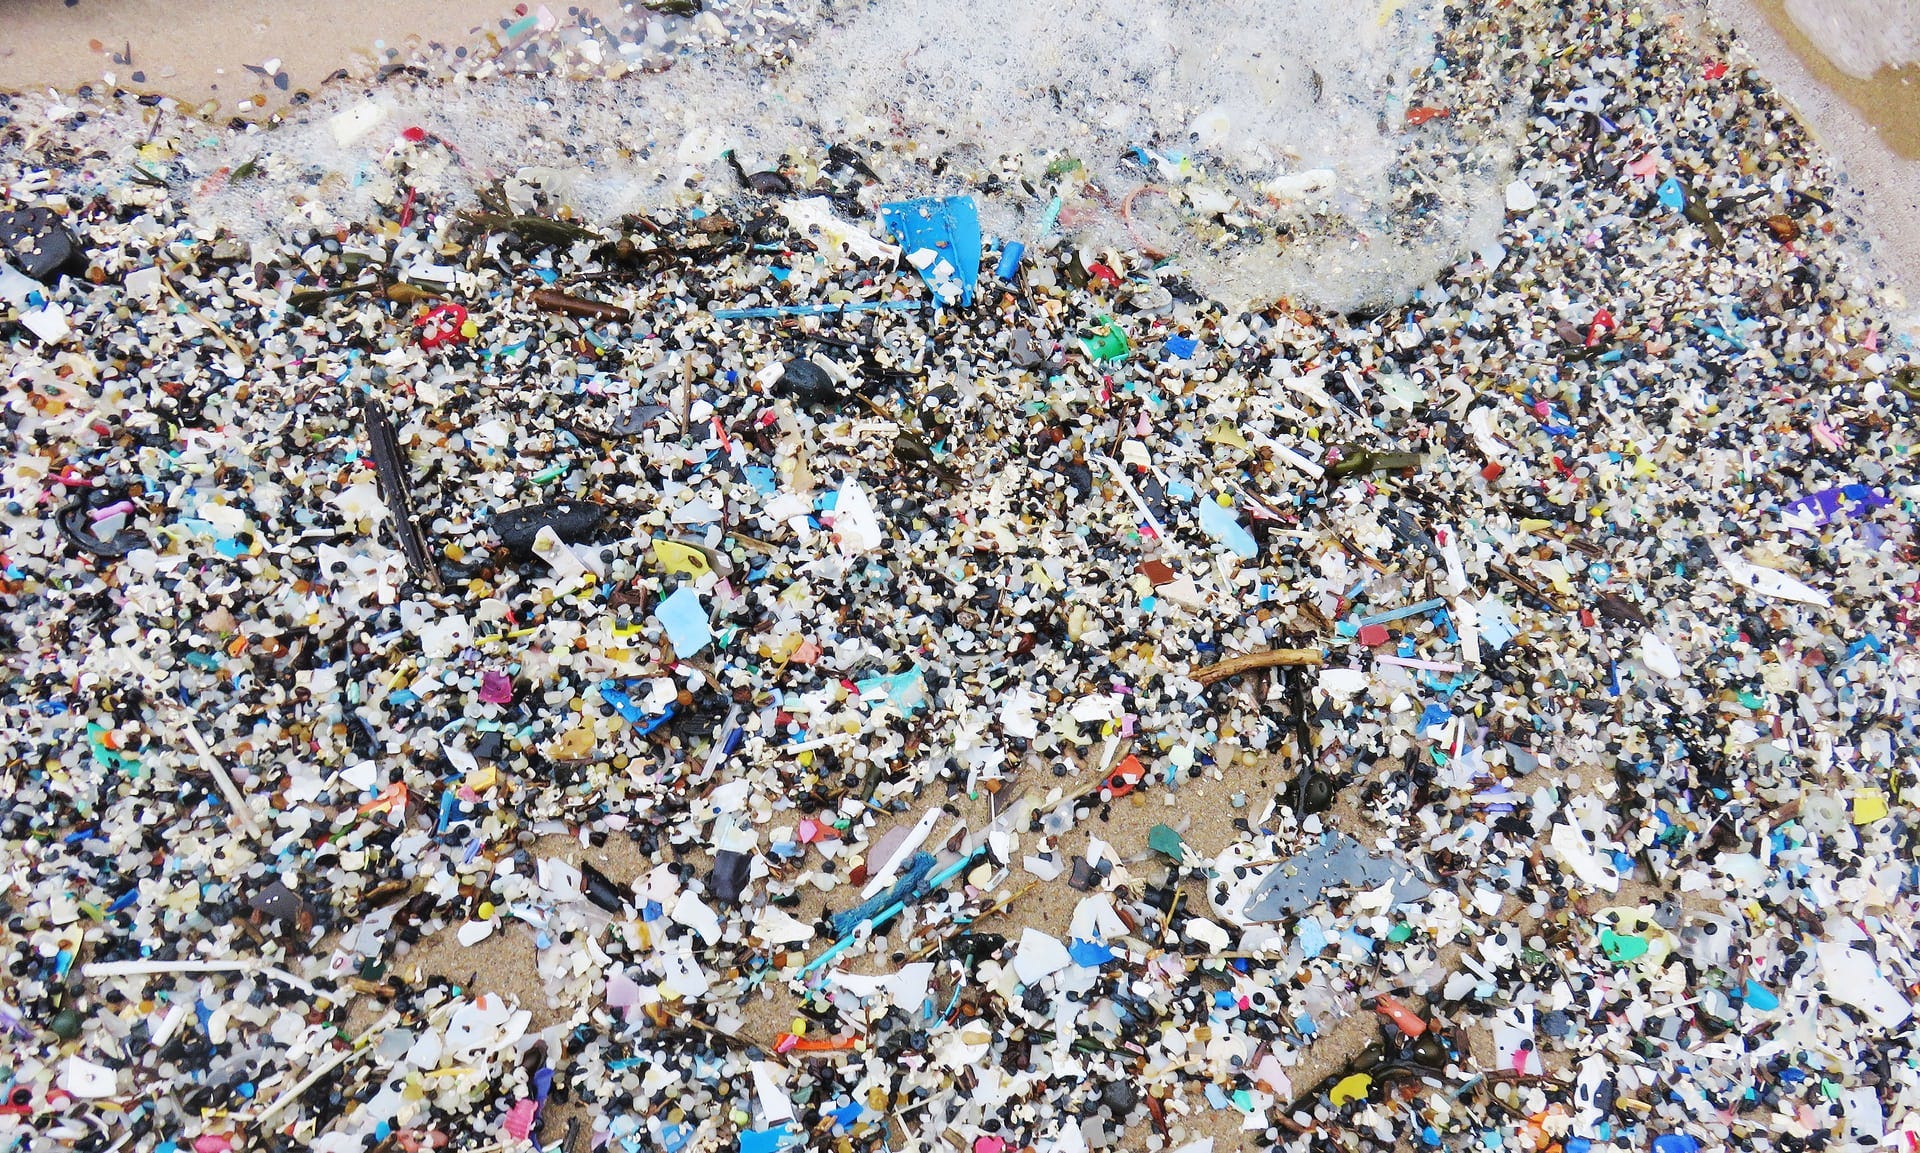 The 10 most insane images of plastic suffocating our oceans